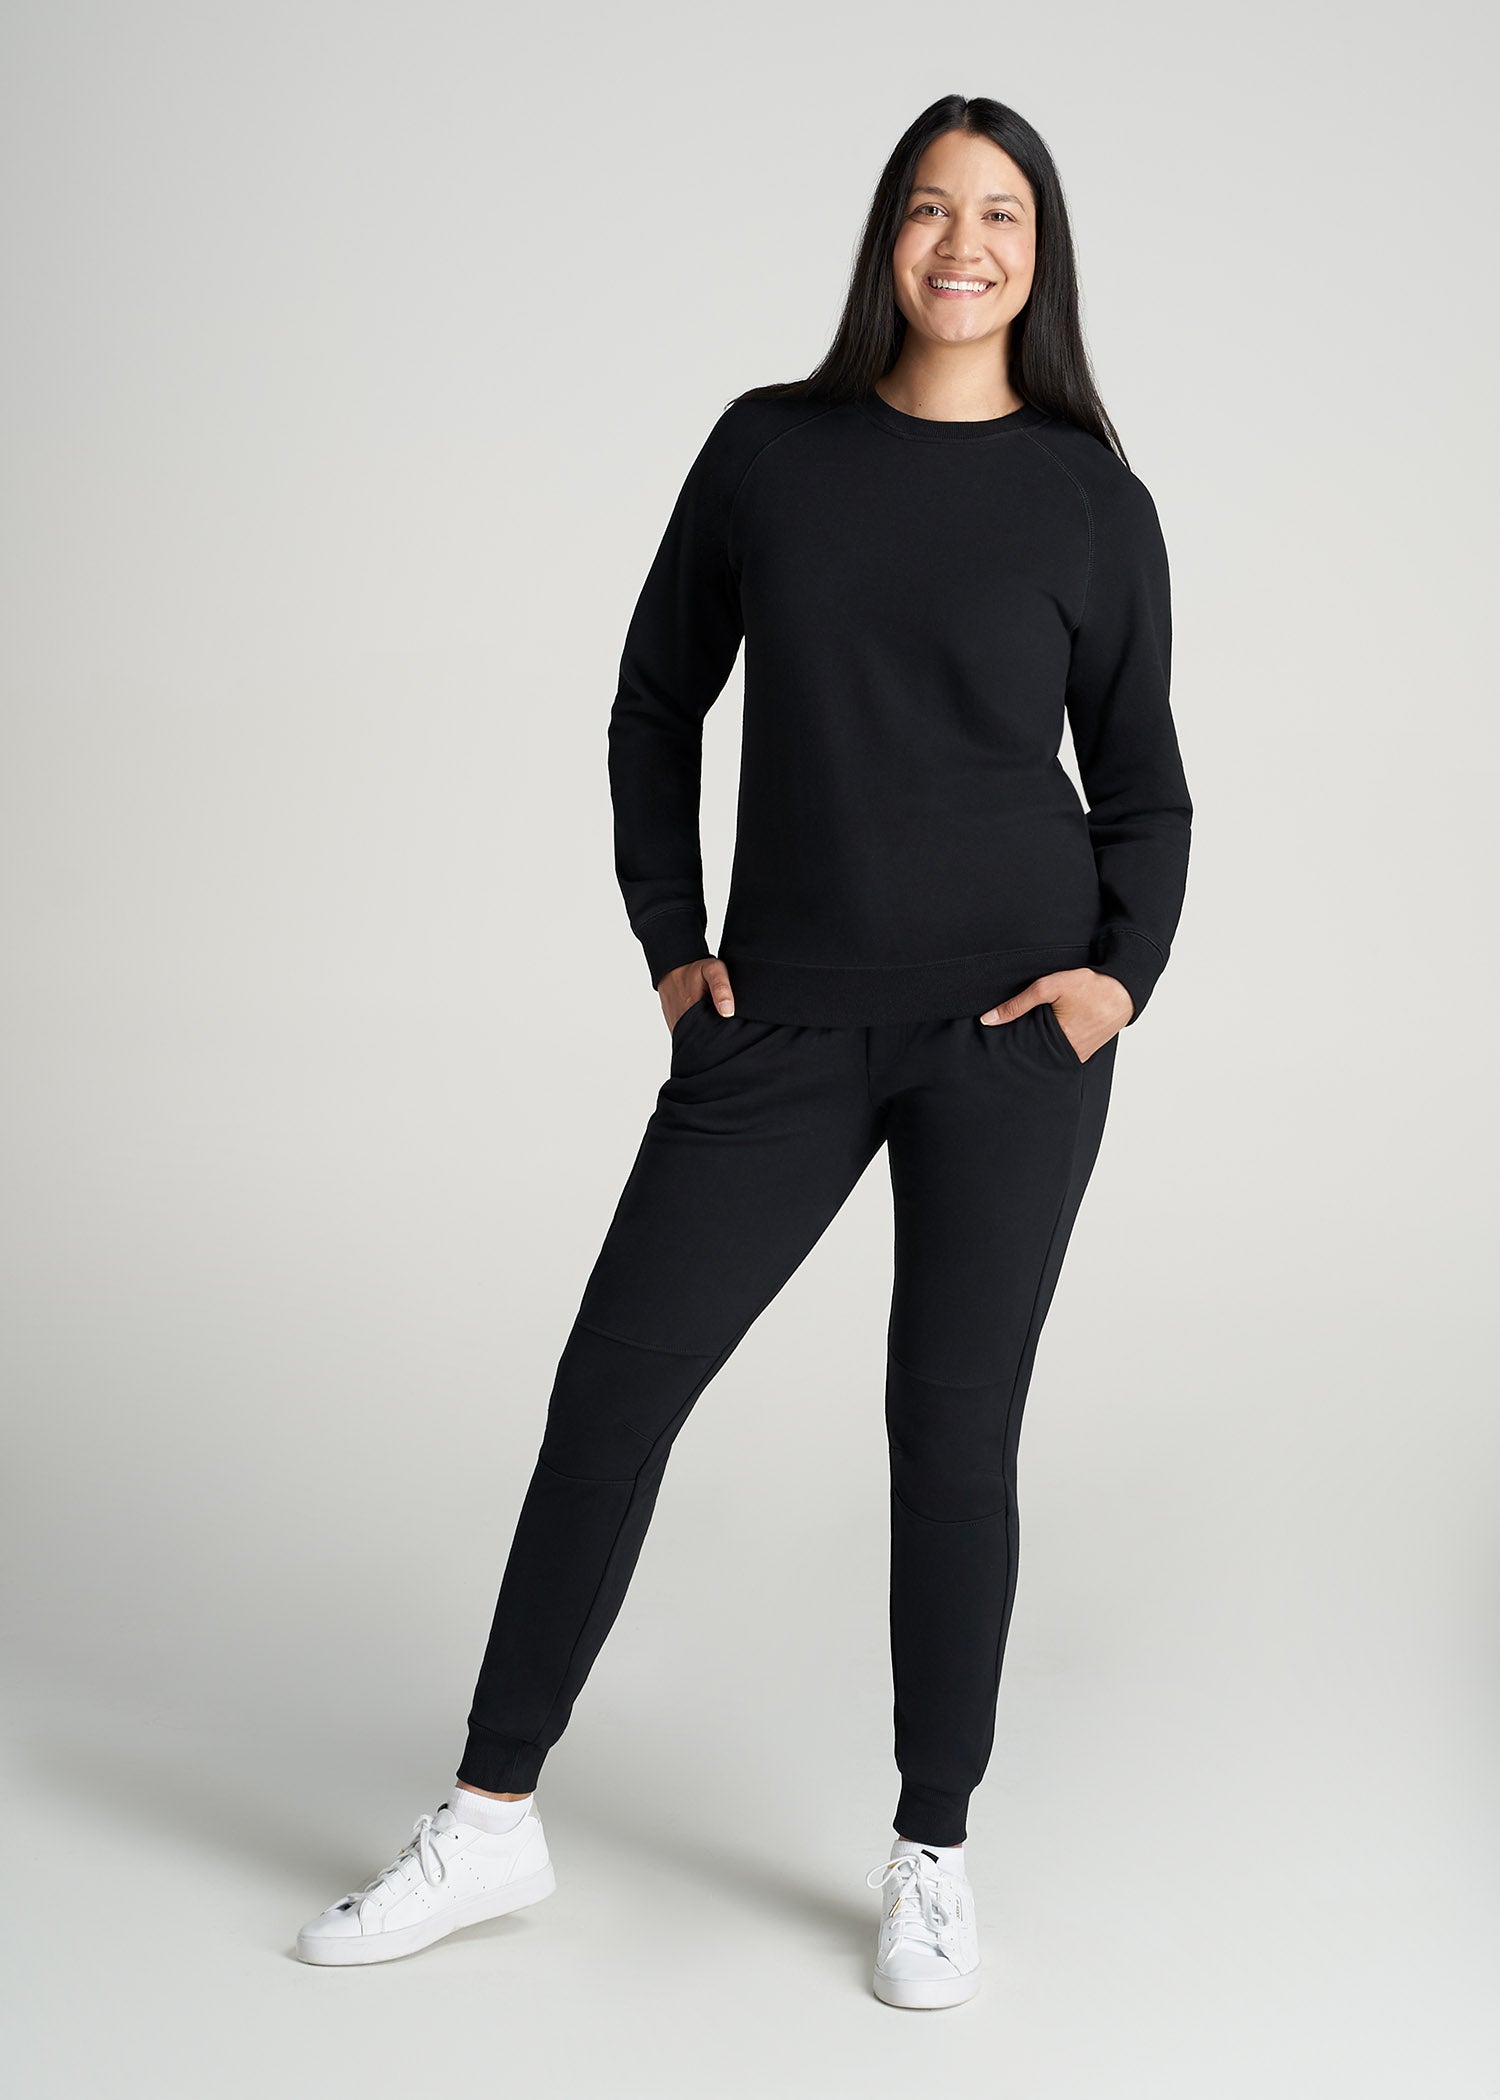 Athletic Works Women's and Women's Plus French Terry Athleisure